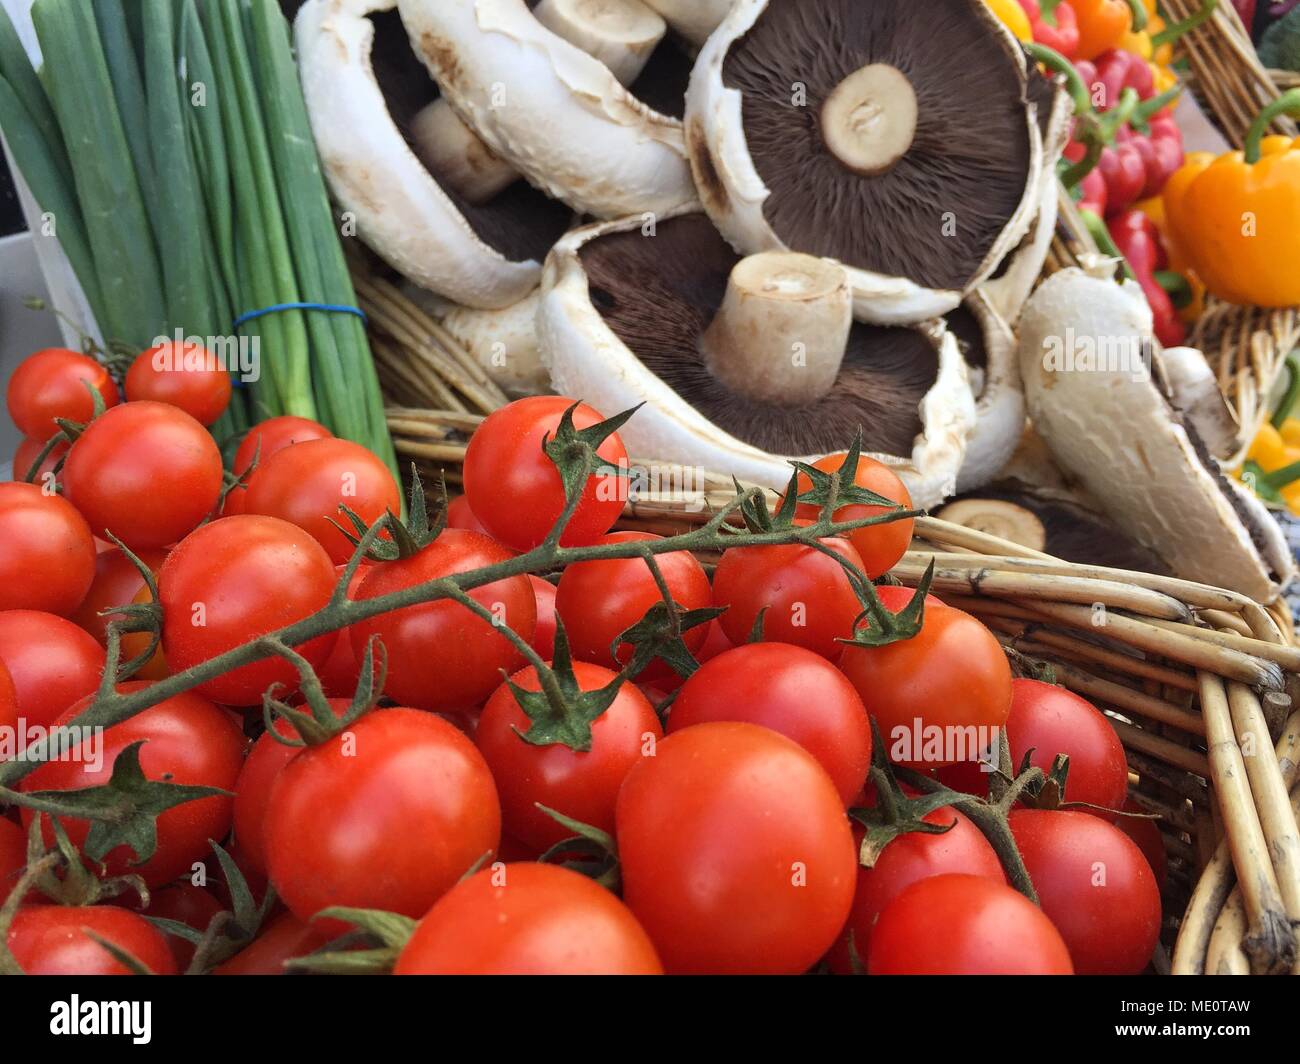 An outdoor market stall laden with a variety of fresh, organic fruit and vegetables including tomatoes, mushrooms and peppers. Stock Photo